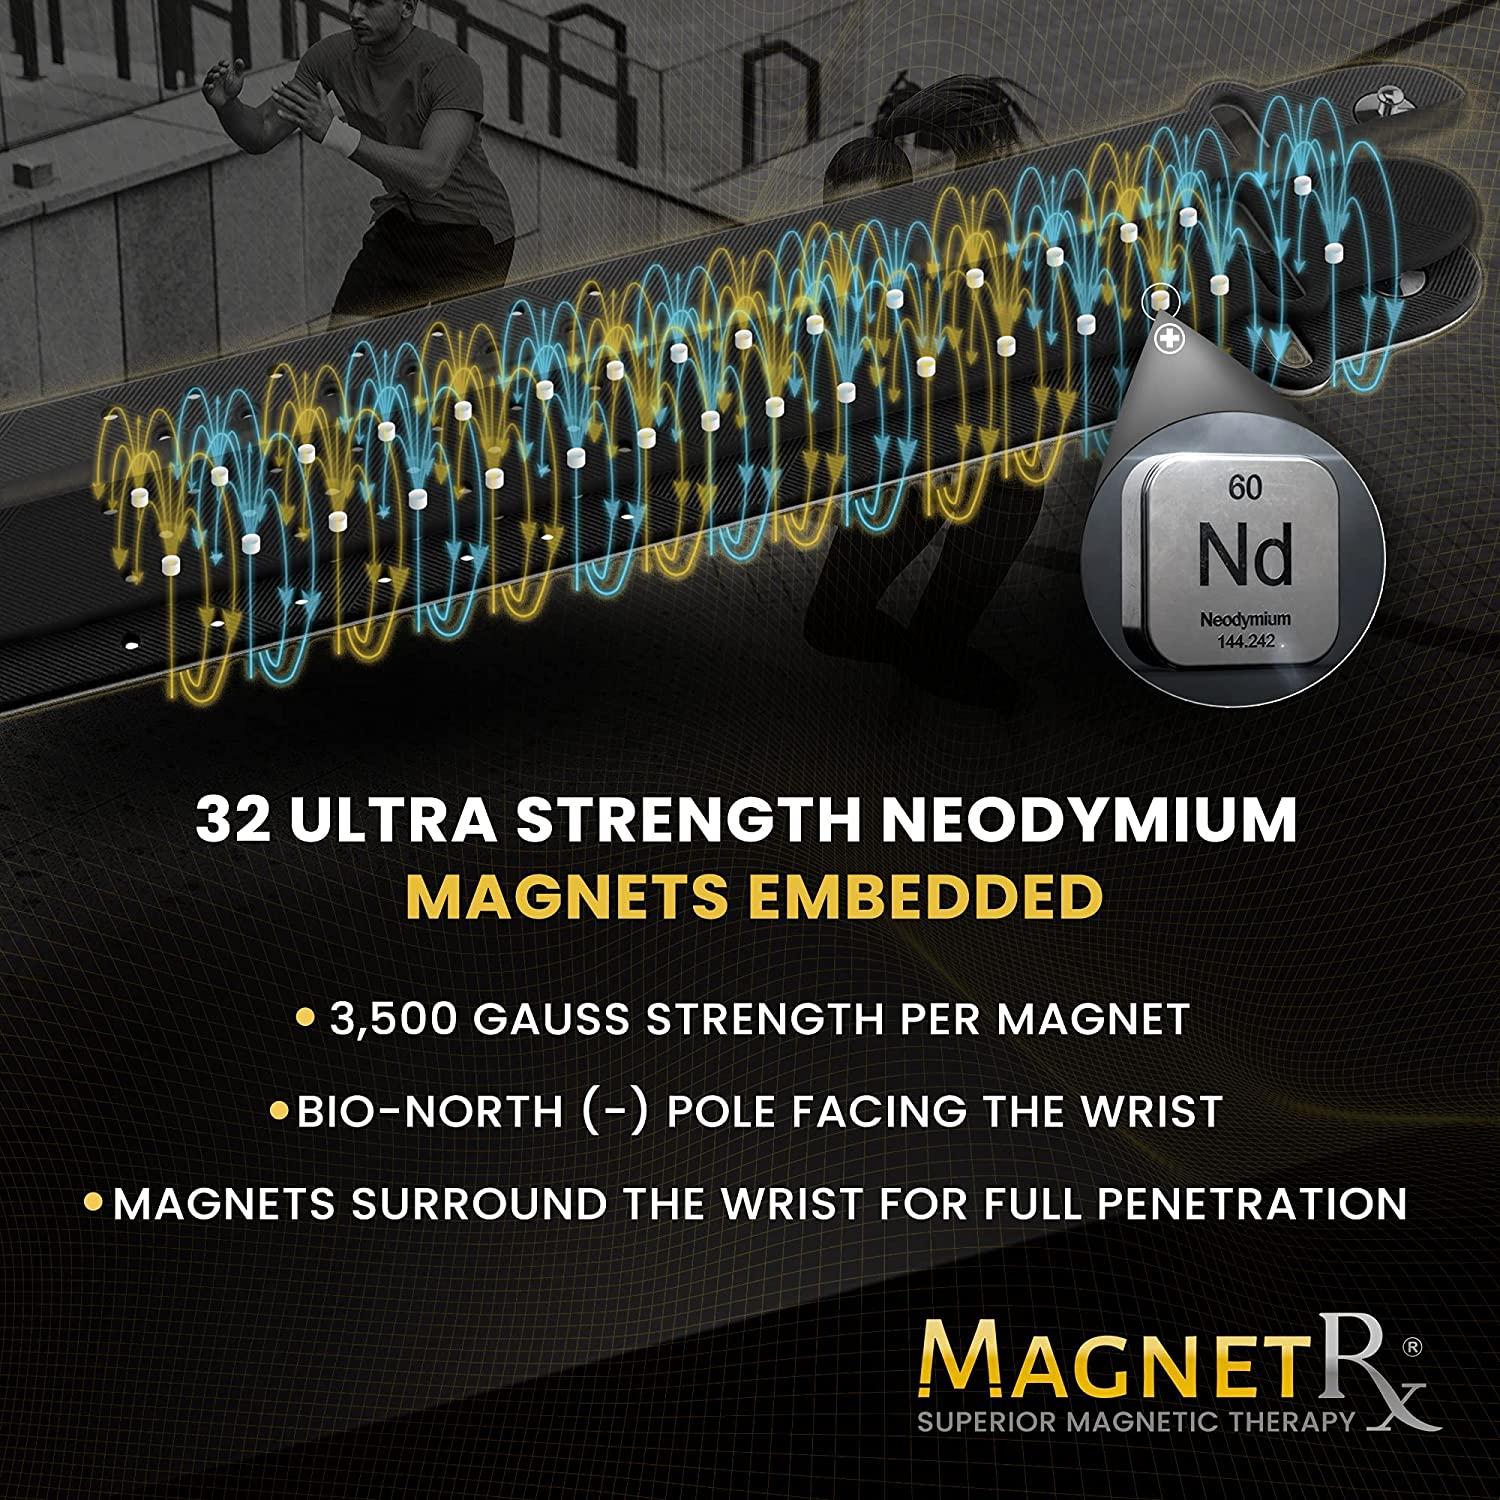 NEOMAX 30 - Powerful sports bracelets from the magnetic bracelets  specialist Magnets 4 Health Ltd